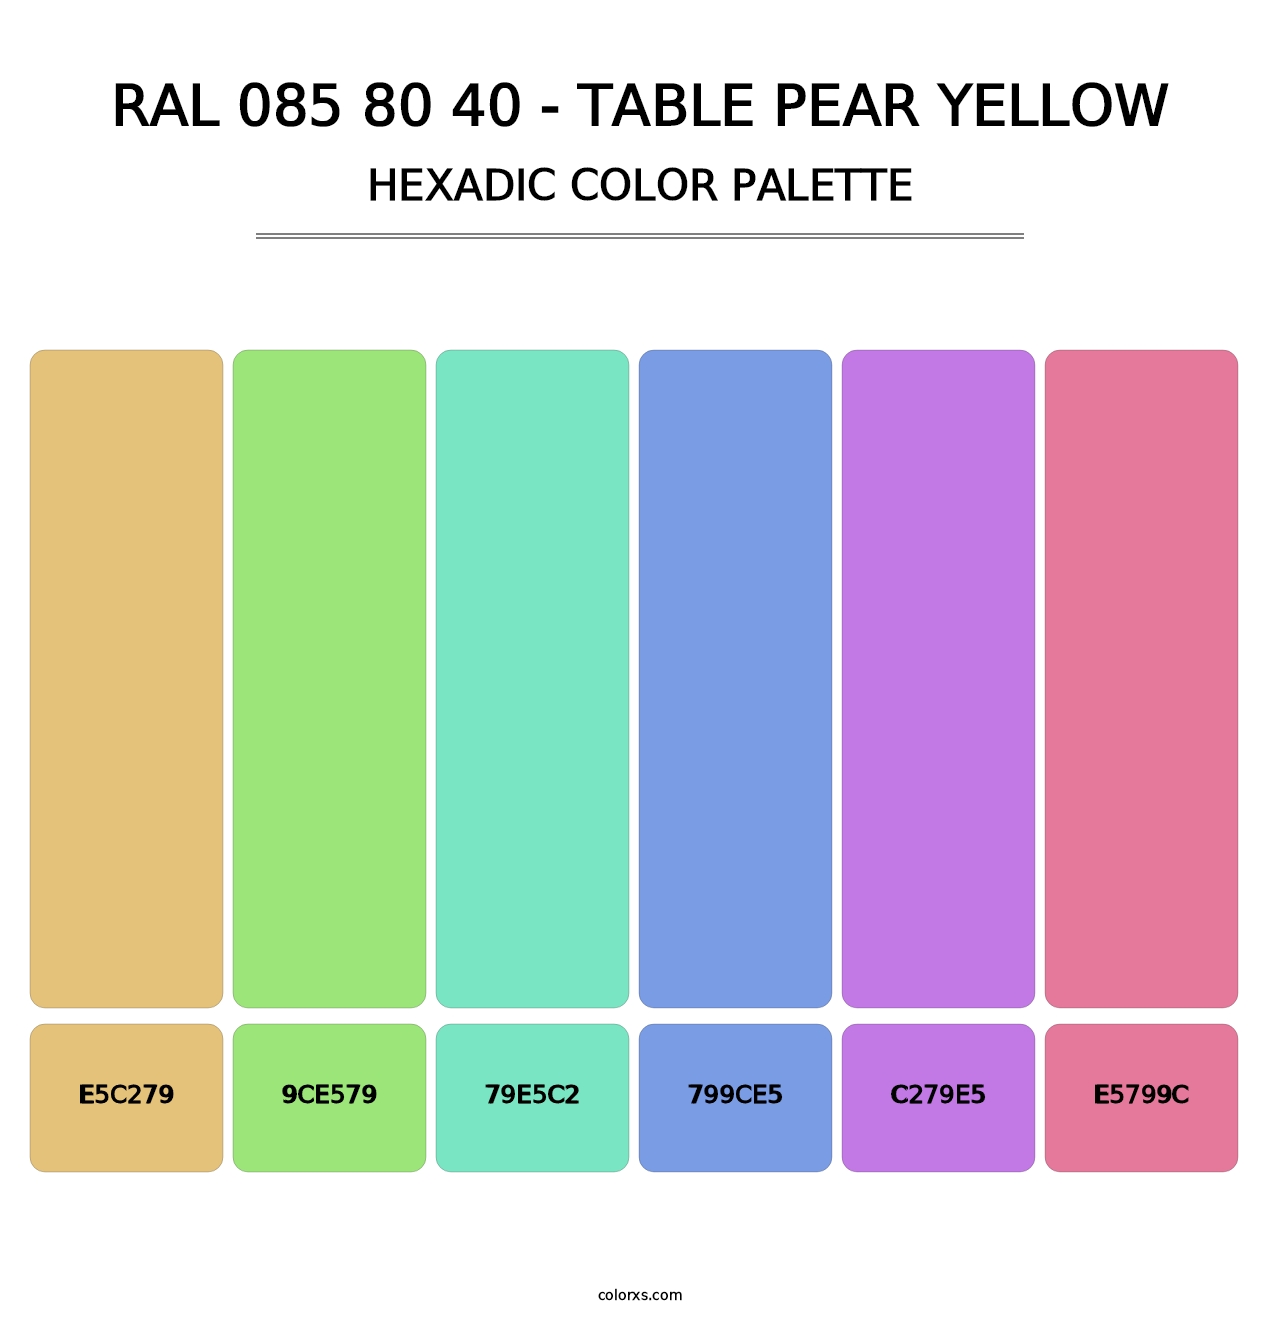 RAL 085 80 40 - Table Pear Yellow - Hexadic Color Palette